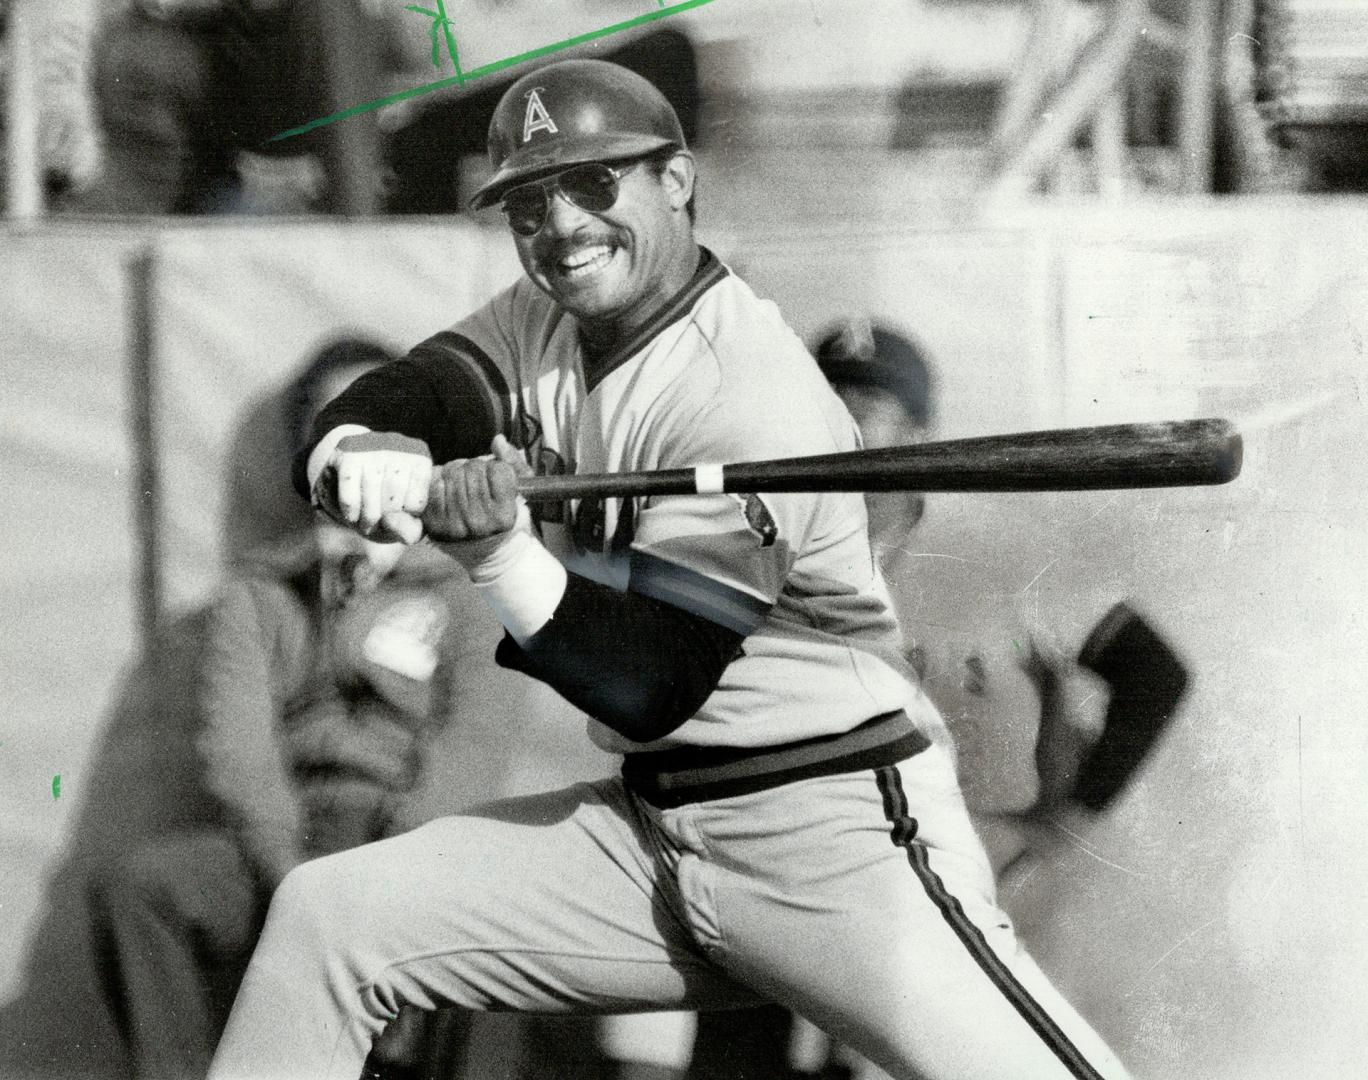 He hit it a smile, So that's the secret of Reggie Jackson's success -- just grin and belt it! Moments before the Angels' slugger cracked his 35th home(...)